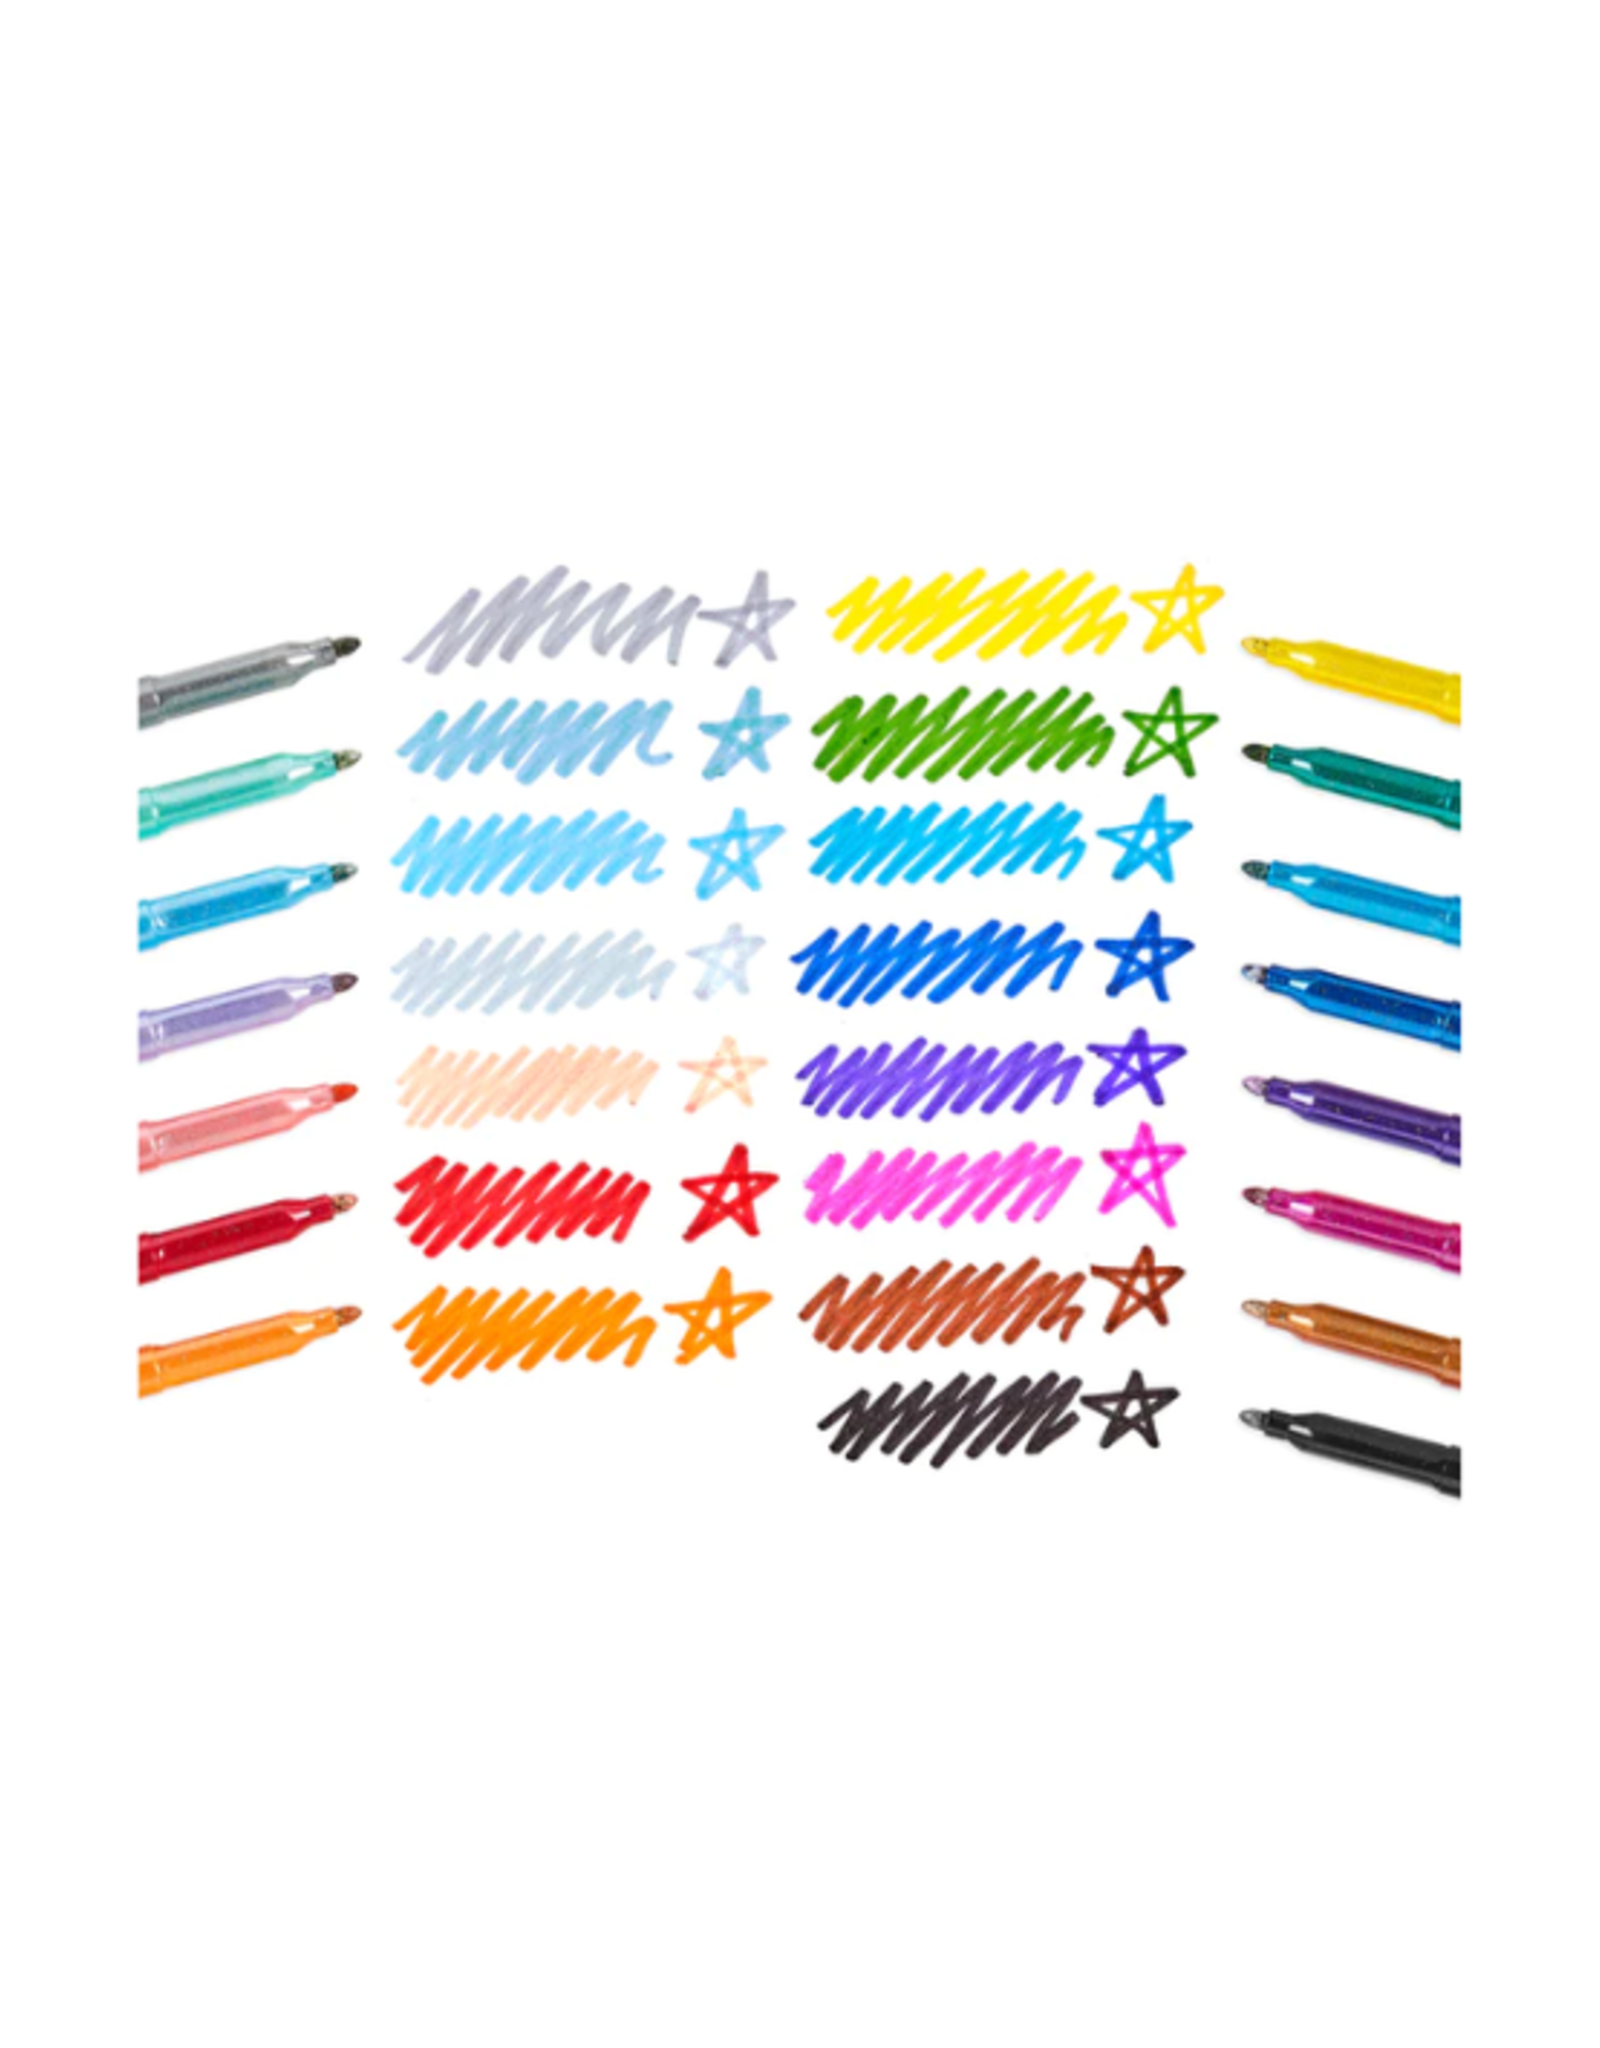 Ooly Ooly - Rainbow Sparkle Glitter Markers